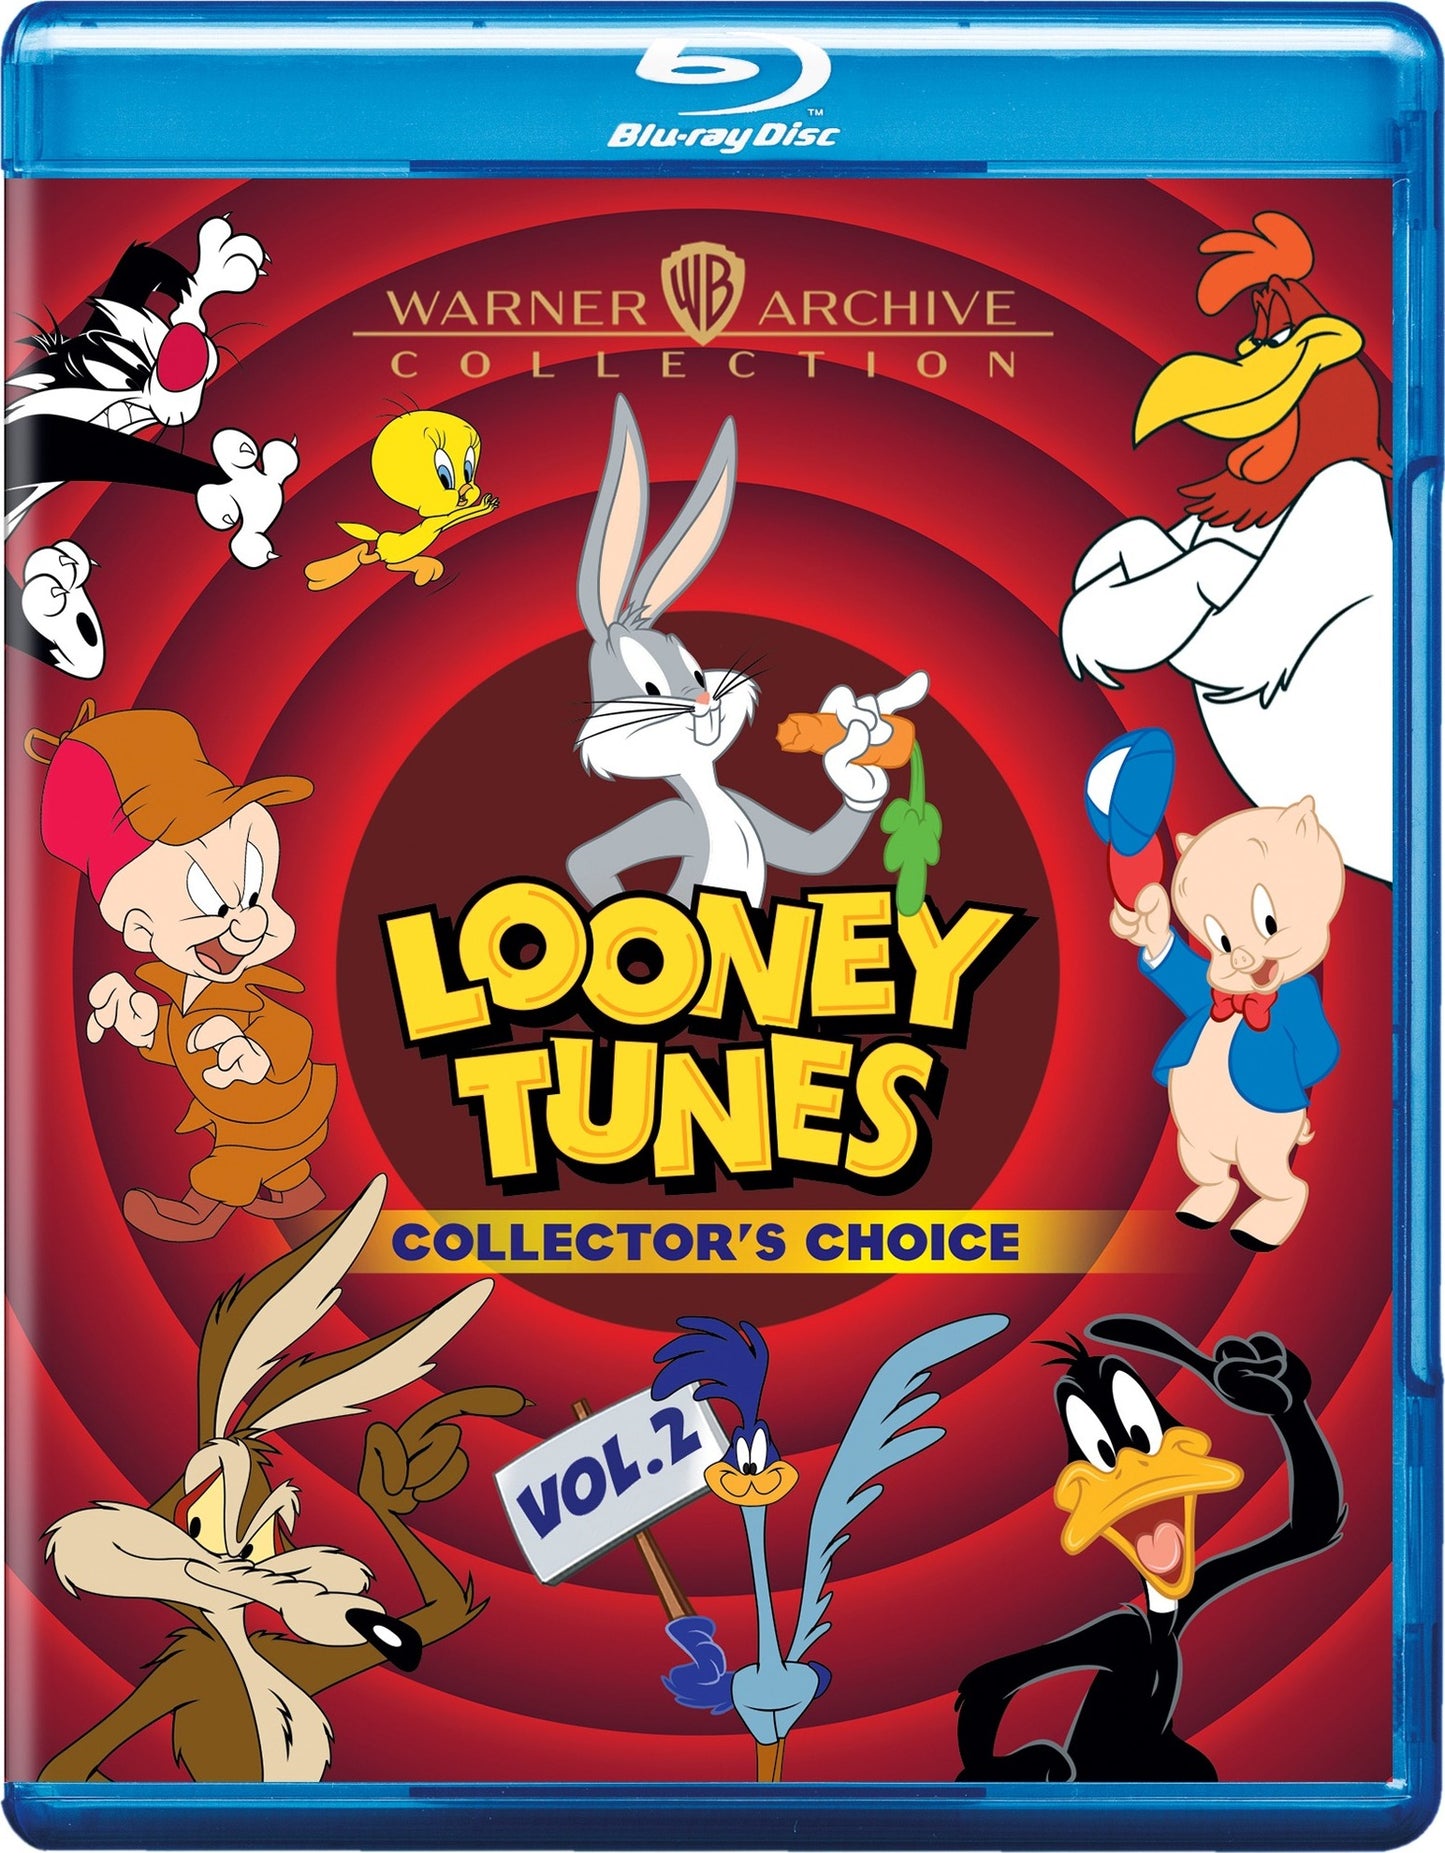 LOONEY TUNES COLECTOR'S CHOICE VOL. 2 (1930-1969)